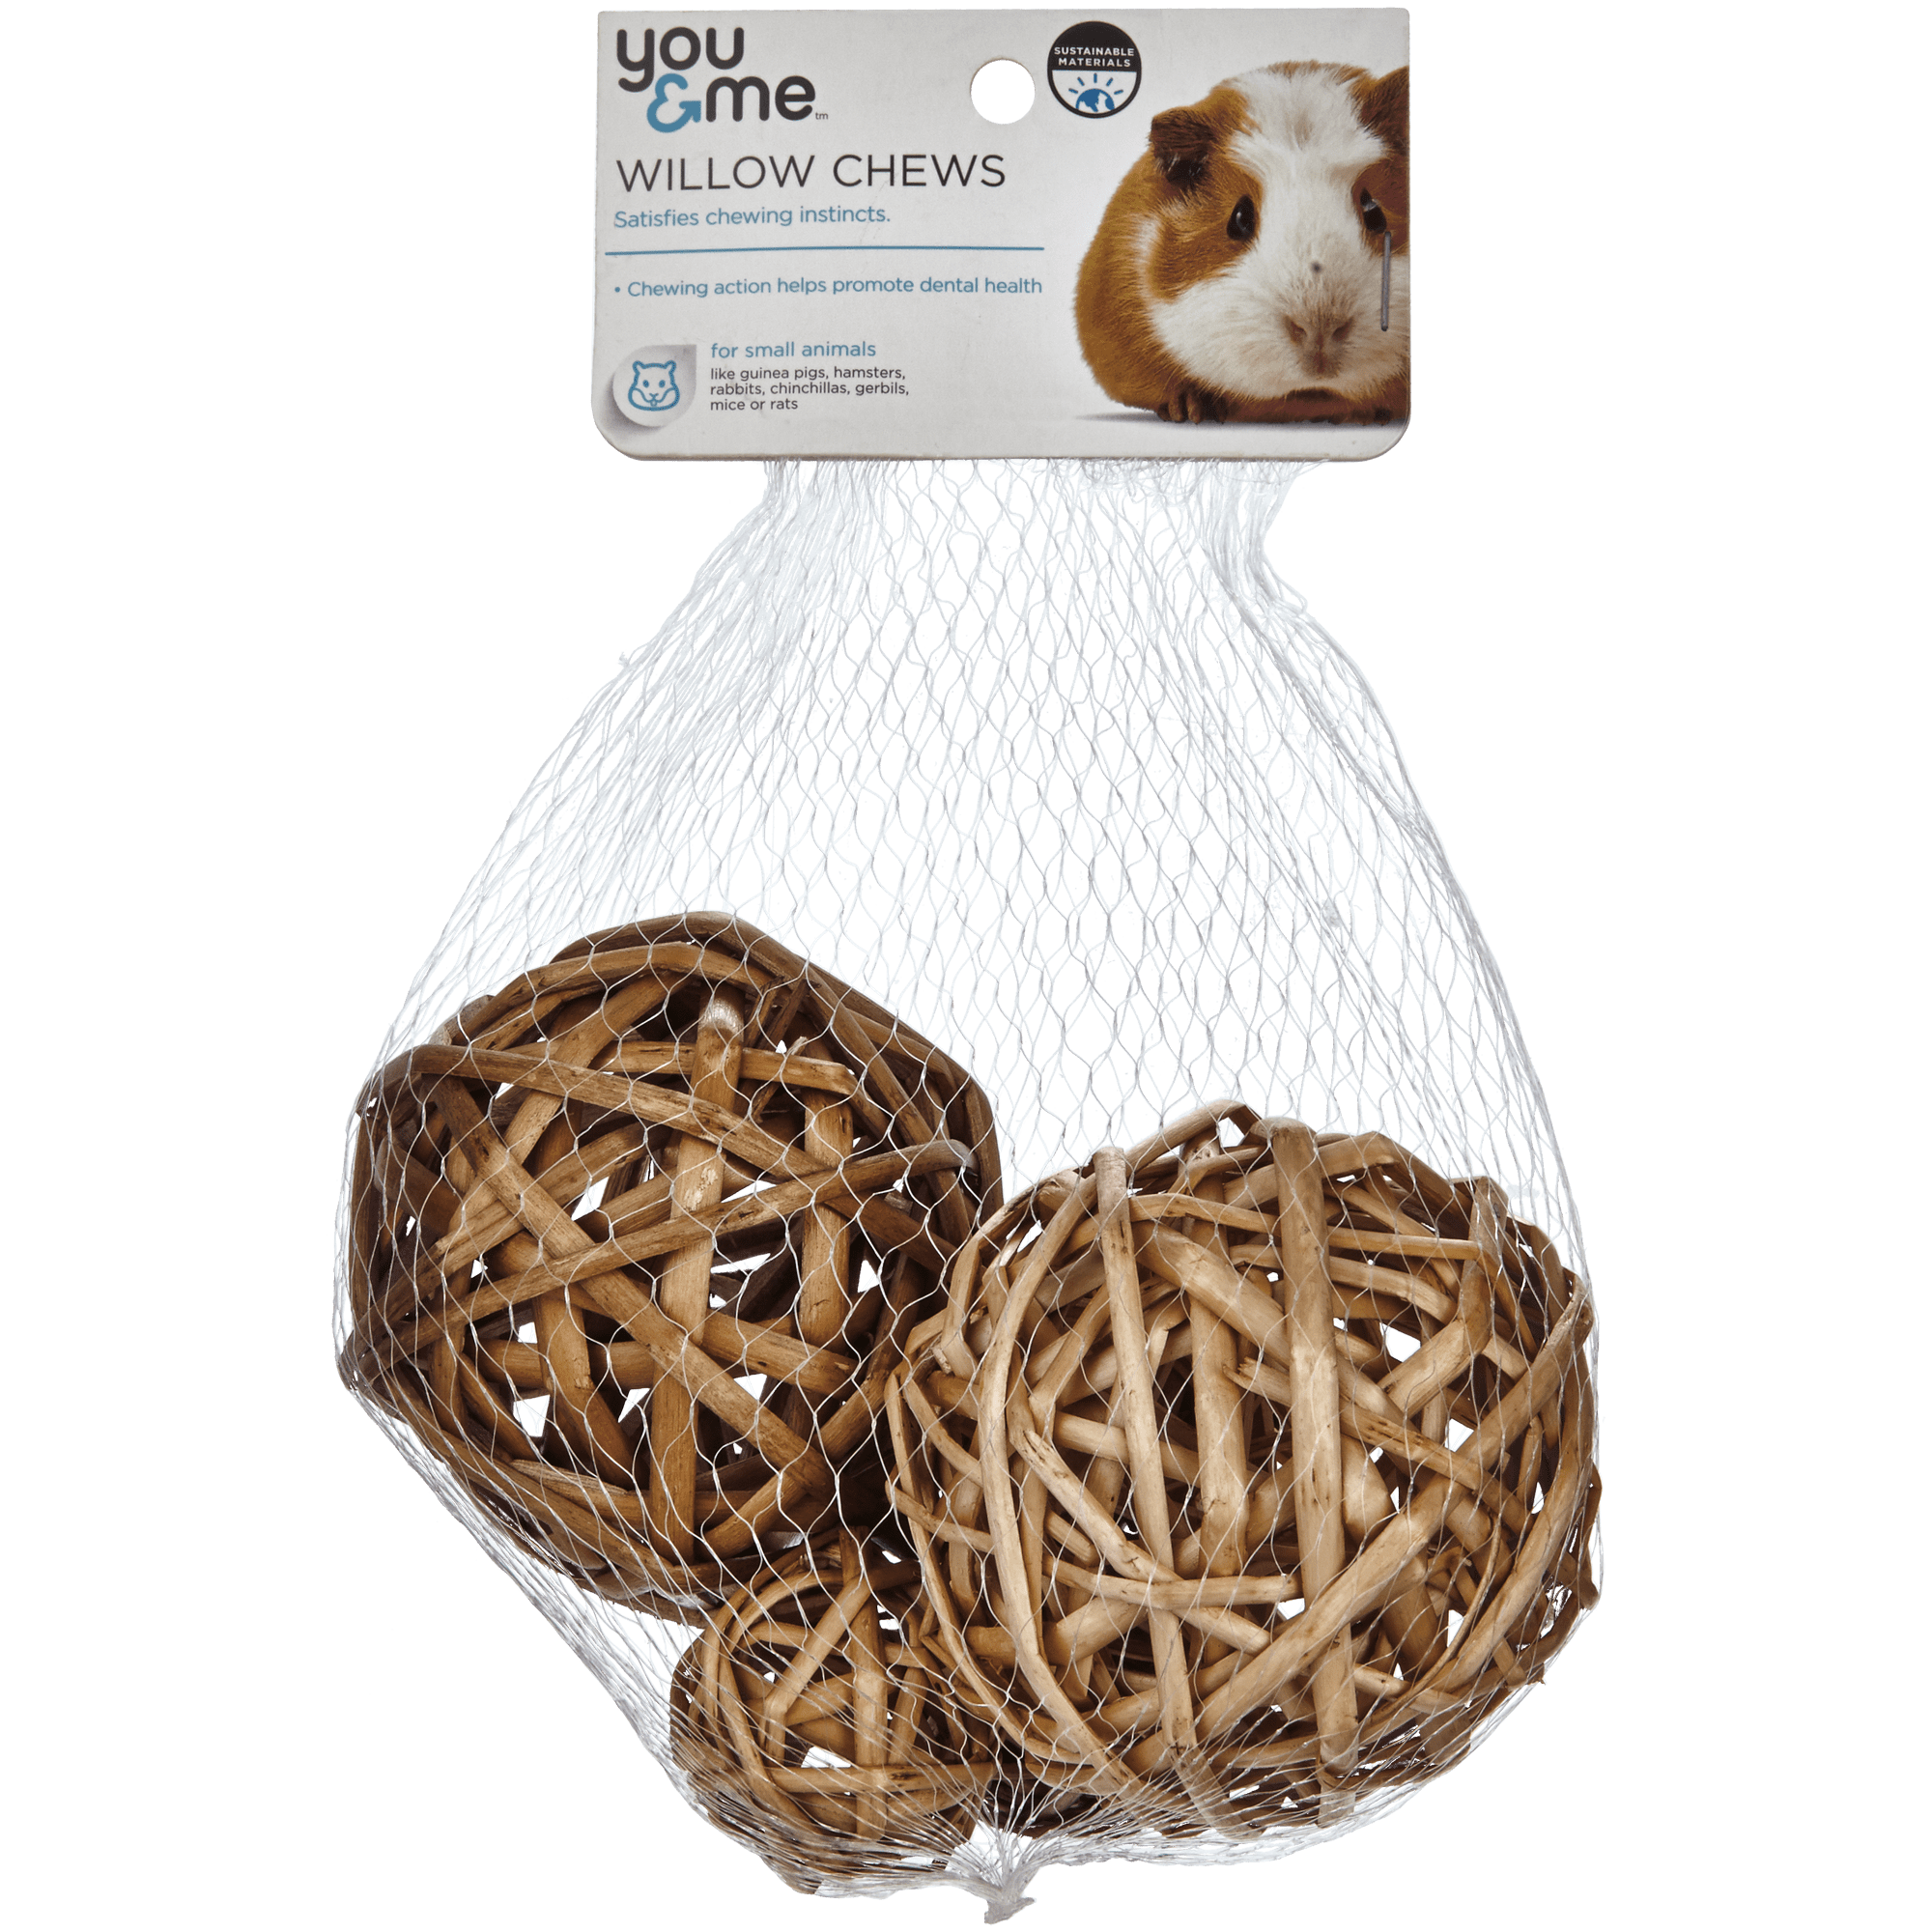 Birds Chinchillas All Natural Large Vine Balls Gerbils Chew Toy For Rabbits Hamsters Guinea Pigs and Other Small Pets Set of Two 4 Inch Wicker Balls 